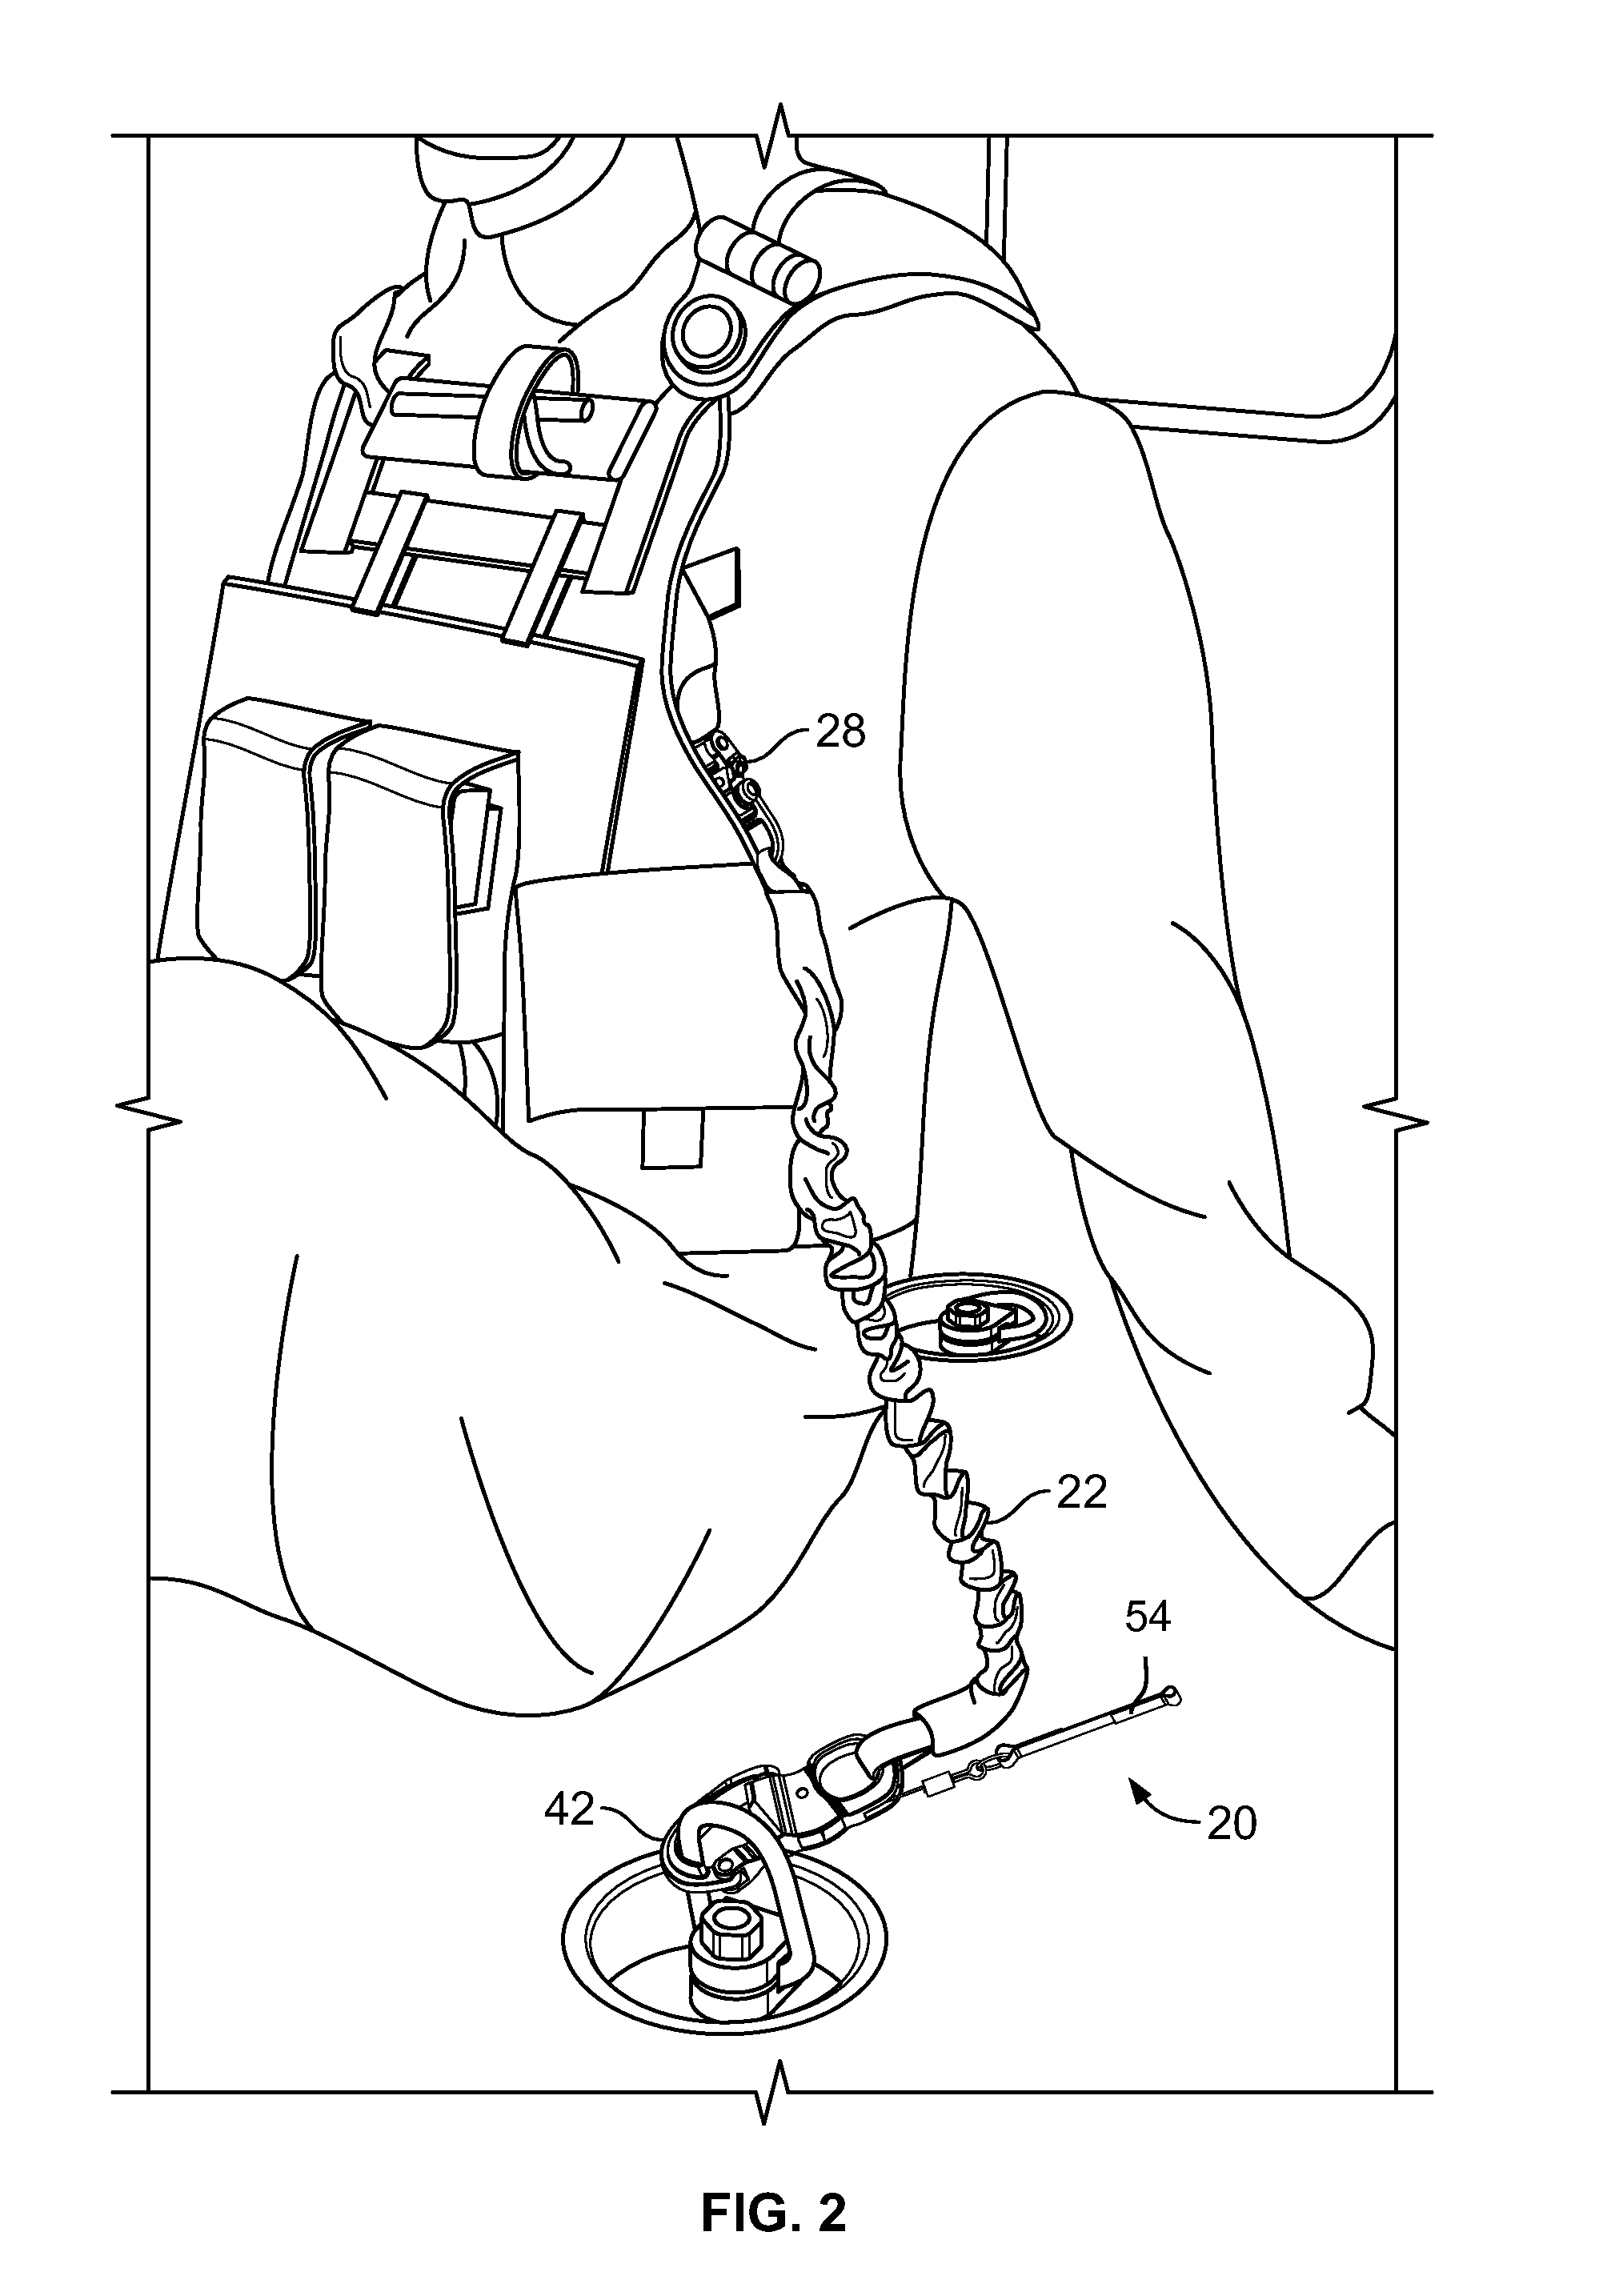 Restraint System with Dual Release Mechanisms